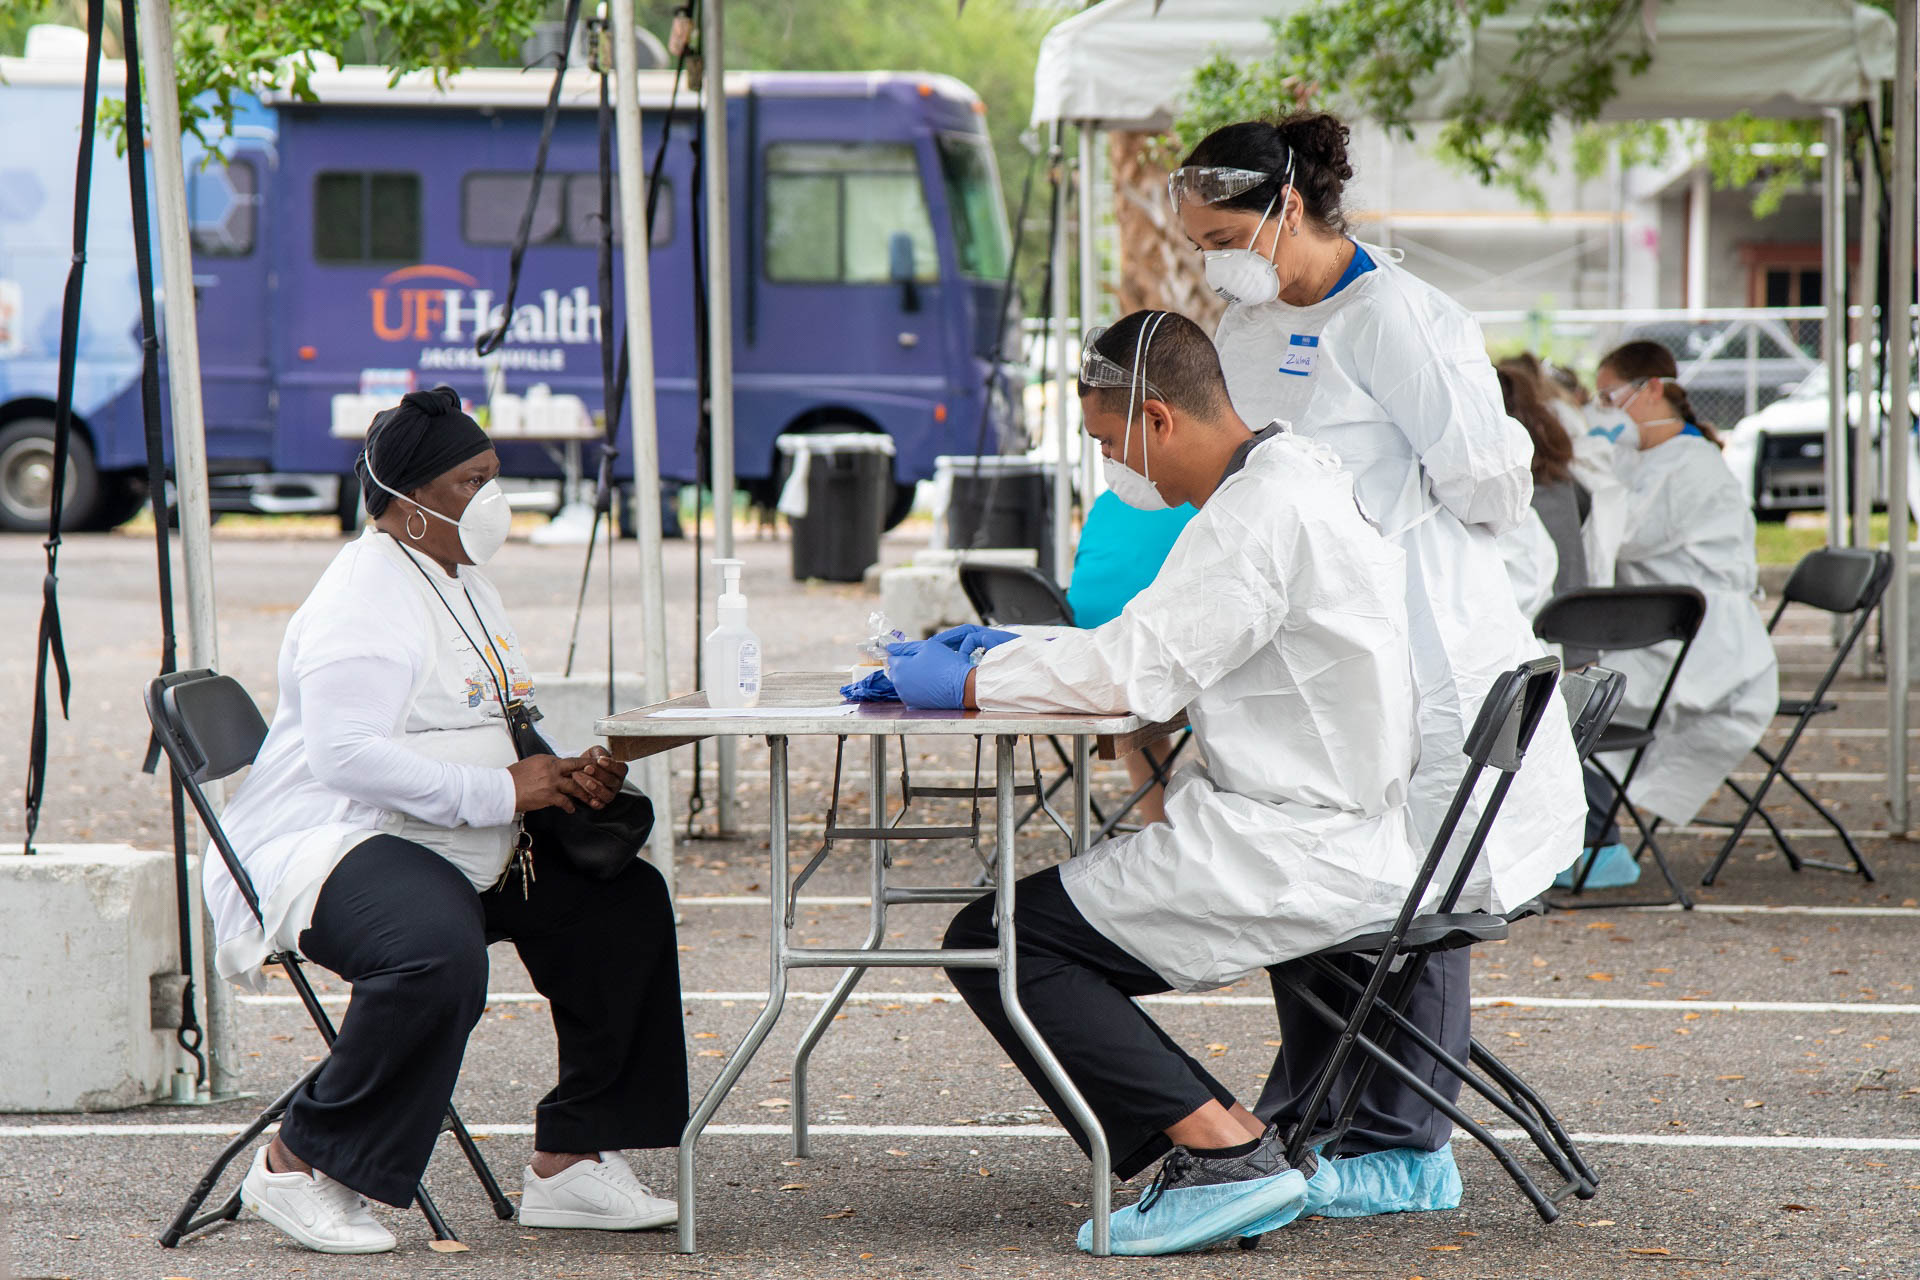 UF Health Jacksonville swiftly worked with local and state health and emergency management officials to begin offering COVID-19 testing for residents of the region who were at risk of being disproportionately affected by the coronavirus public health emergency. [April 8, 2020]